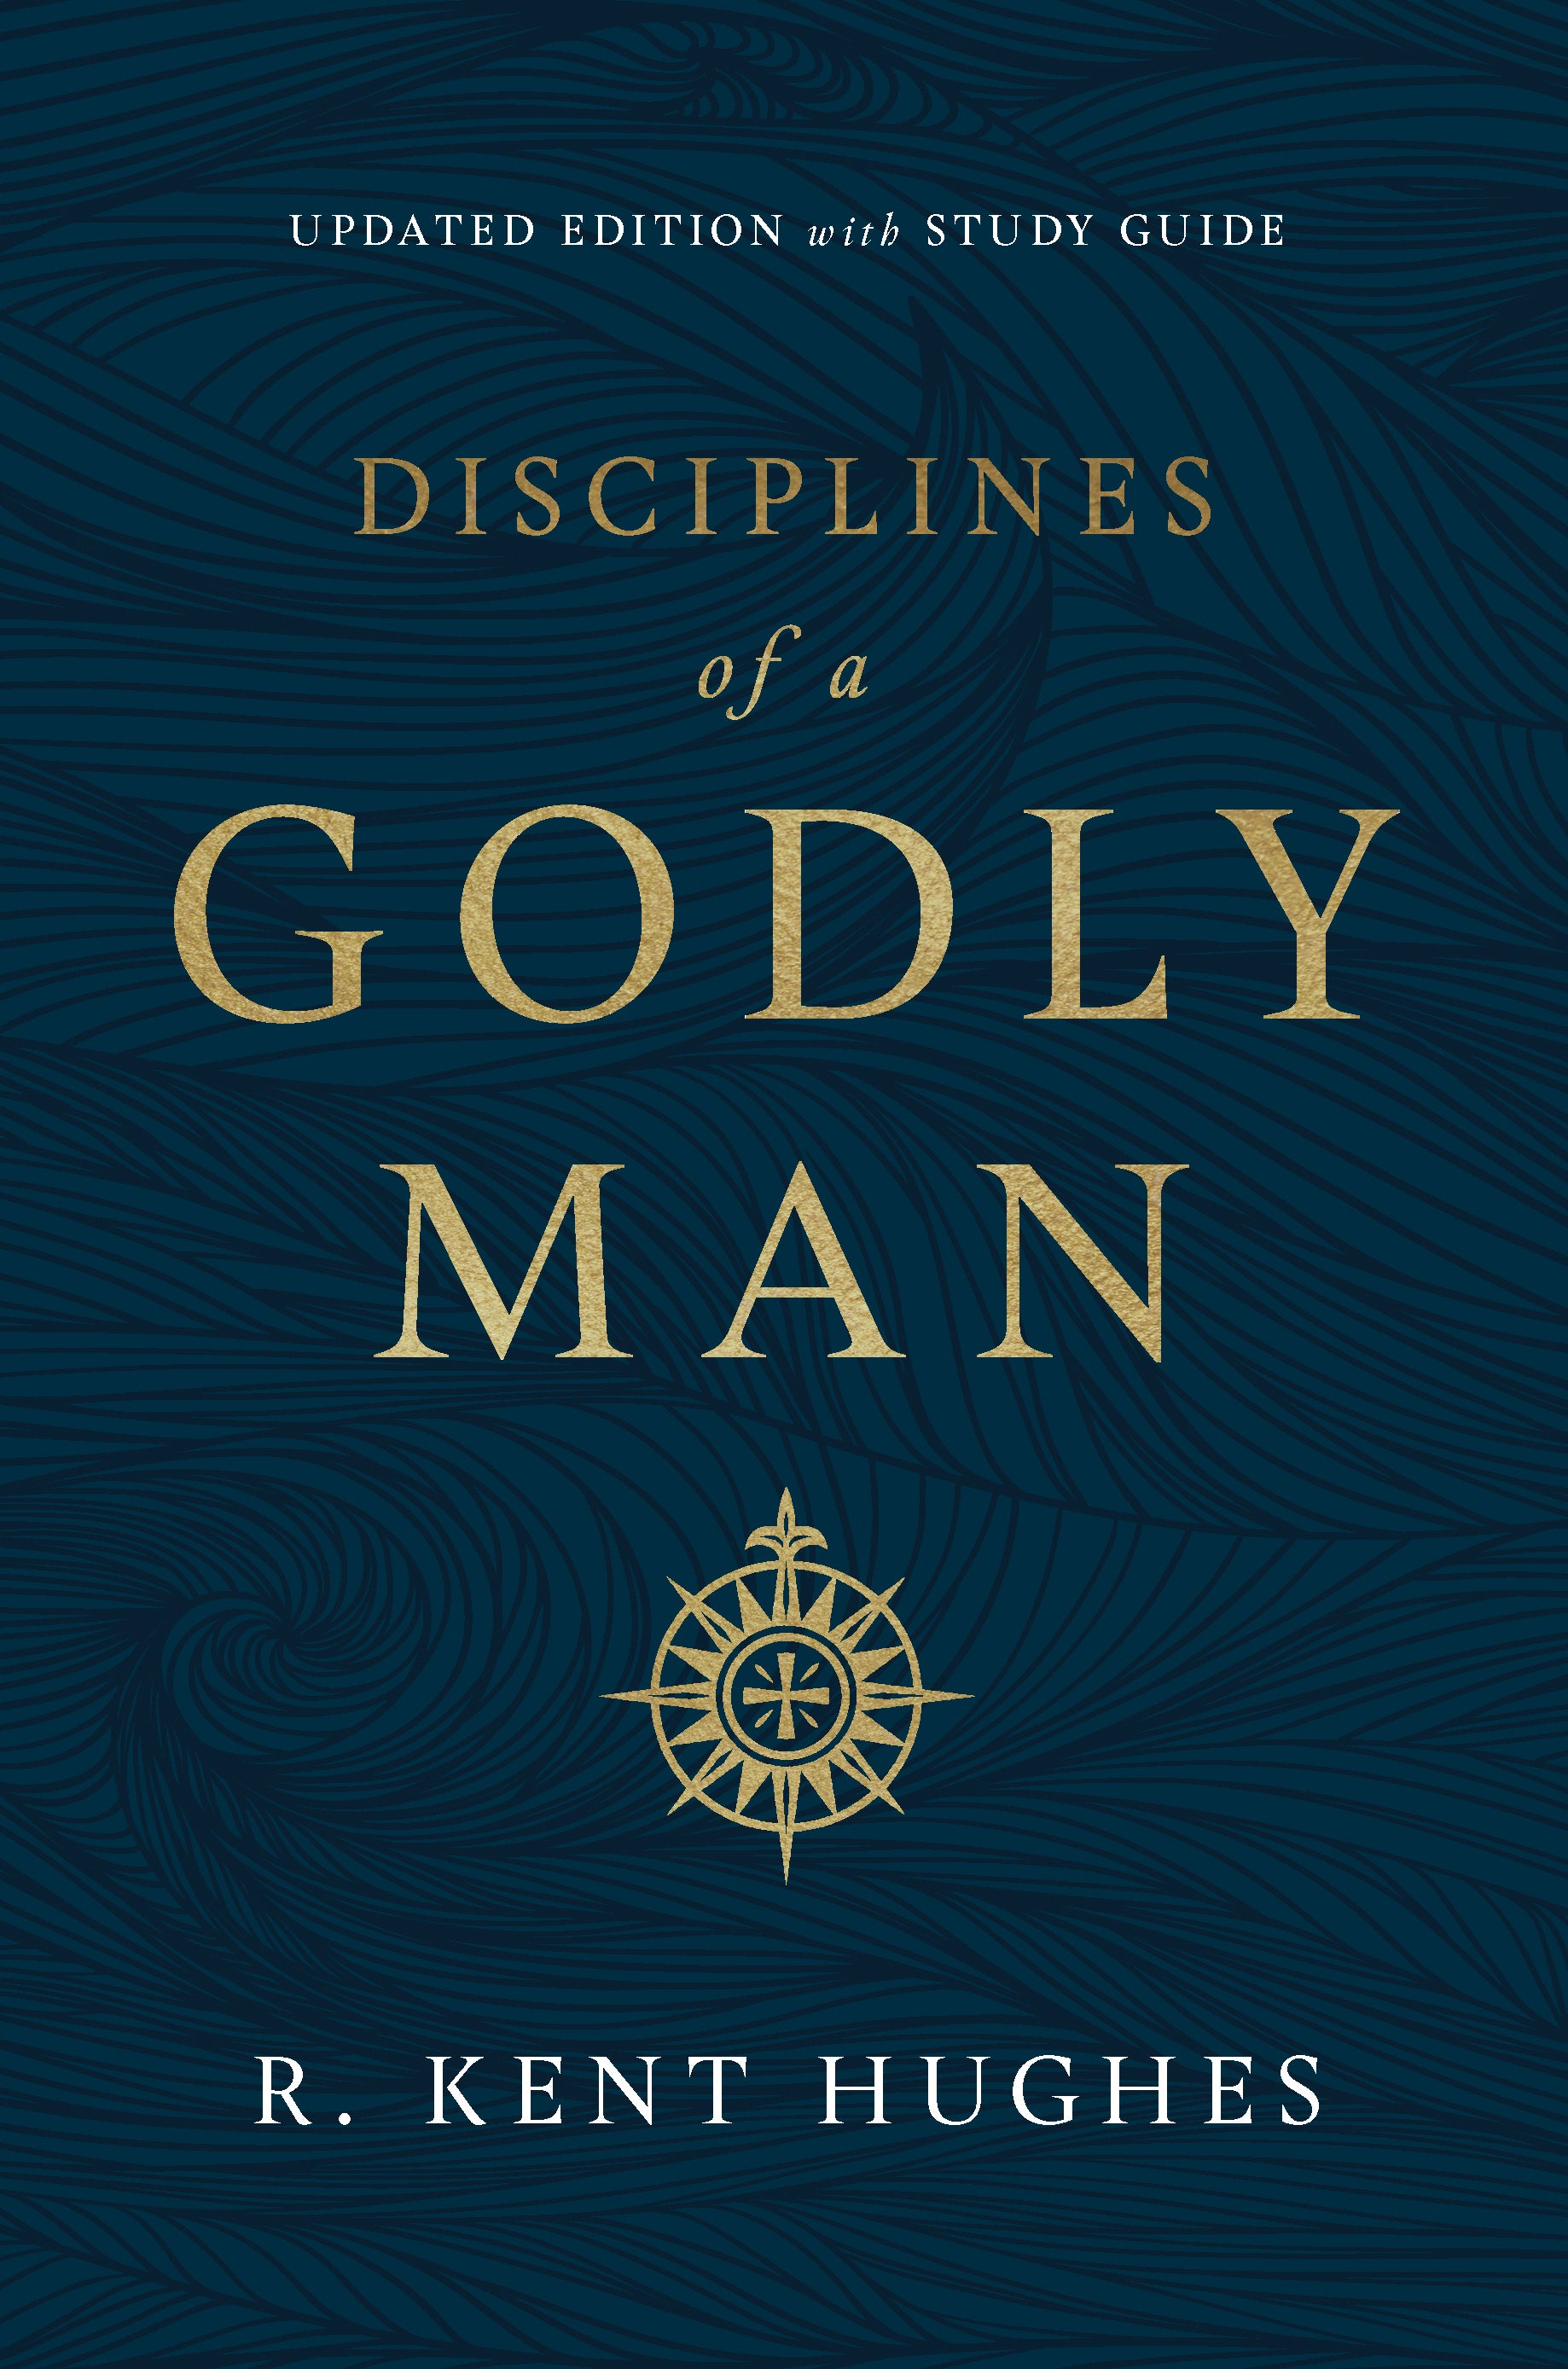 Image of Disciplines of a Godly Man (Updated Edition) other